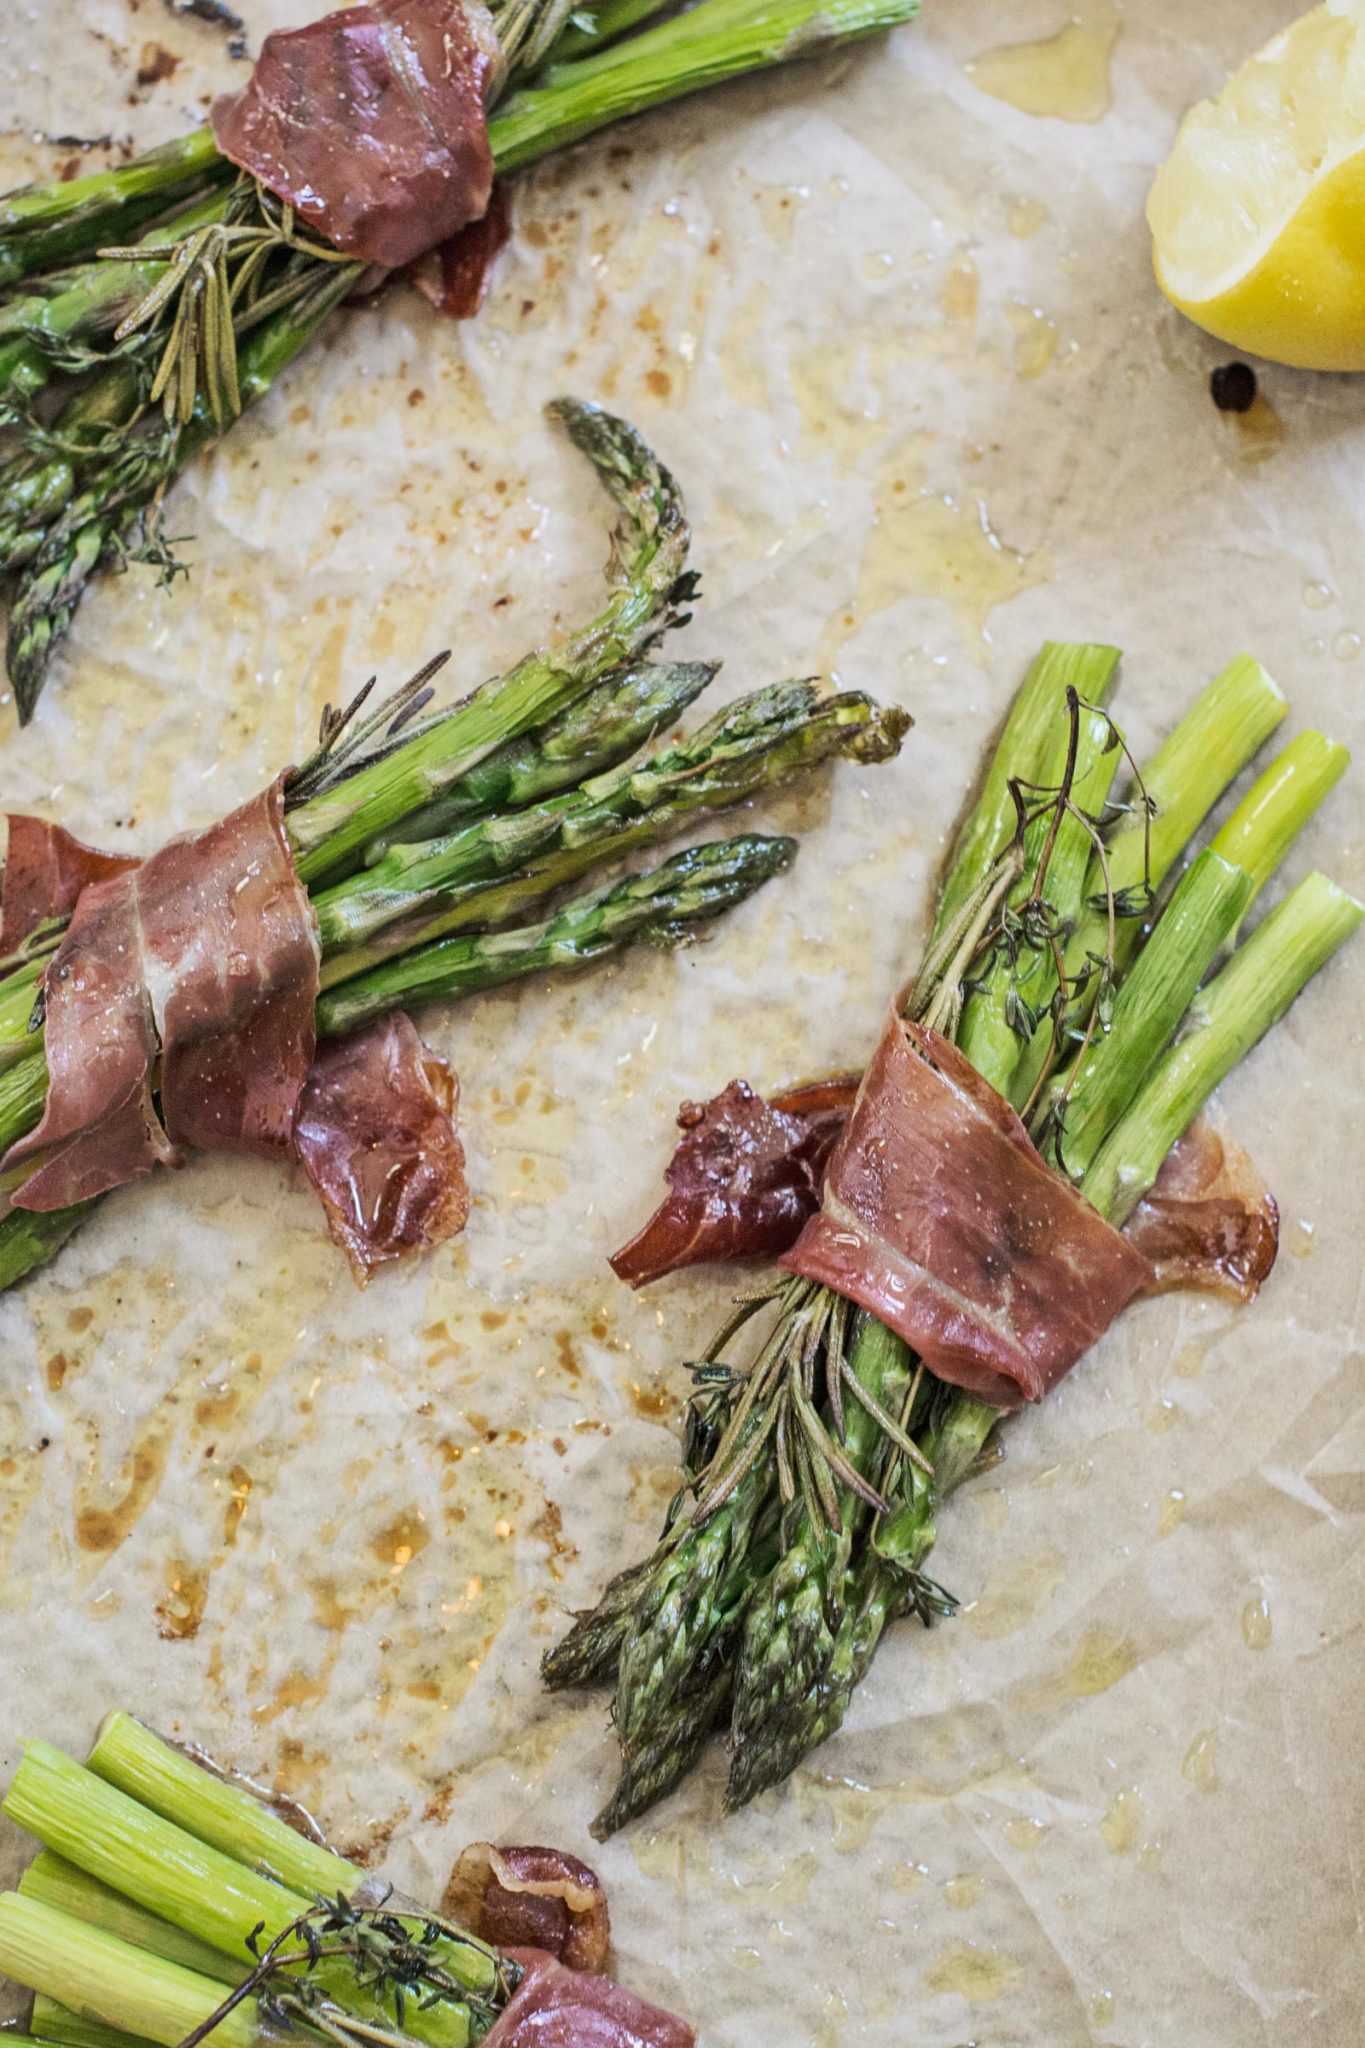 Roasted Asparagus with Prosciutto recipe from @LittleFiggyFood